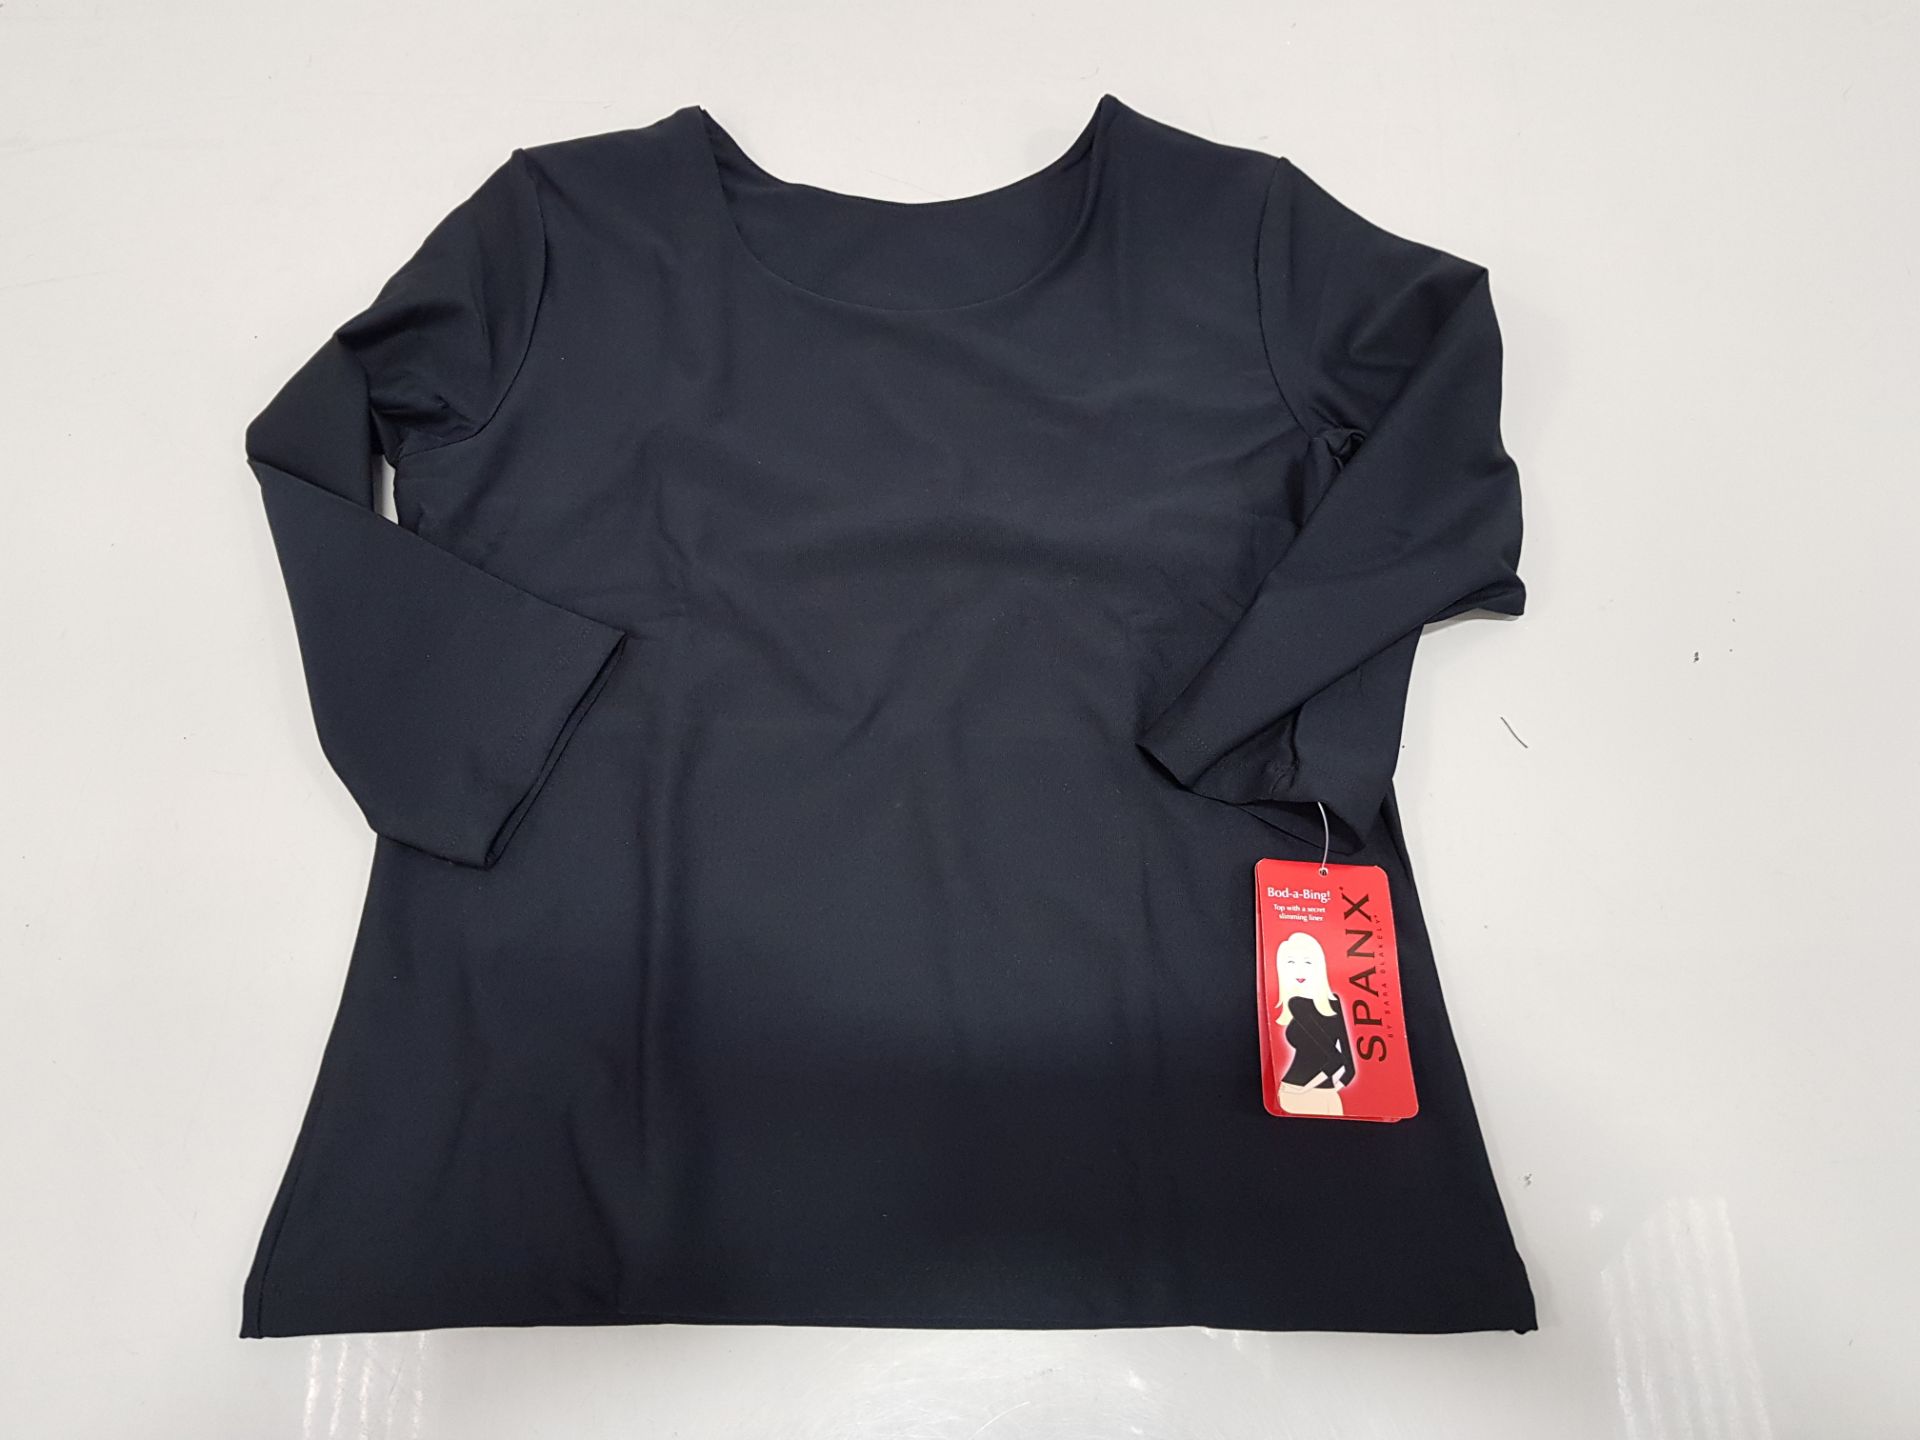 APPROX 20 X BRAND NEW SPANX 3/4 BOATNECK TOP LARGE IN BLACK IN 1 BOX